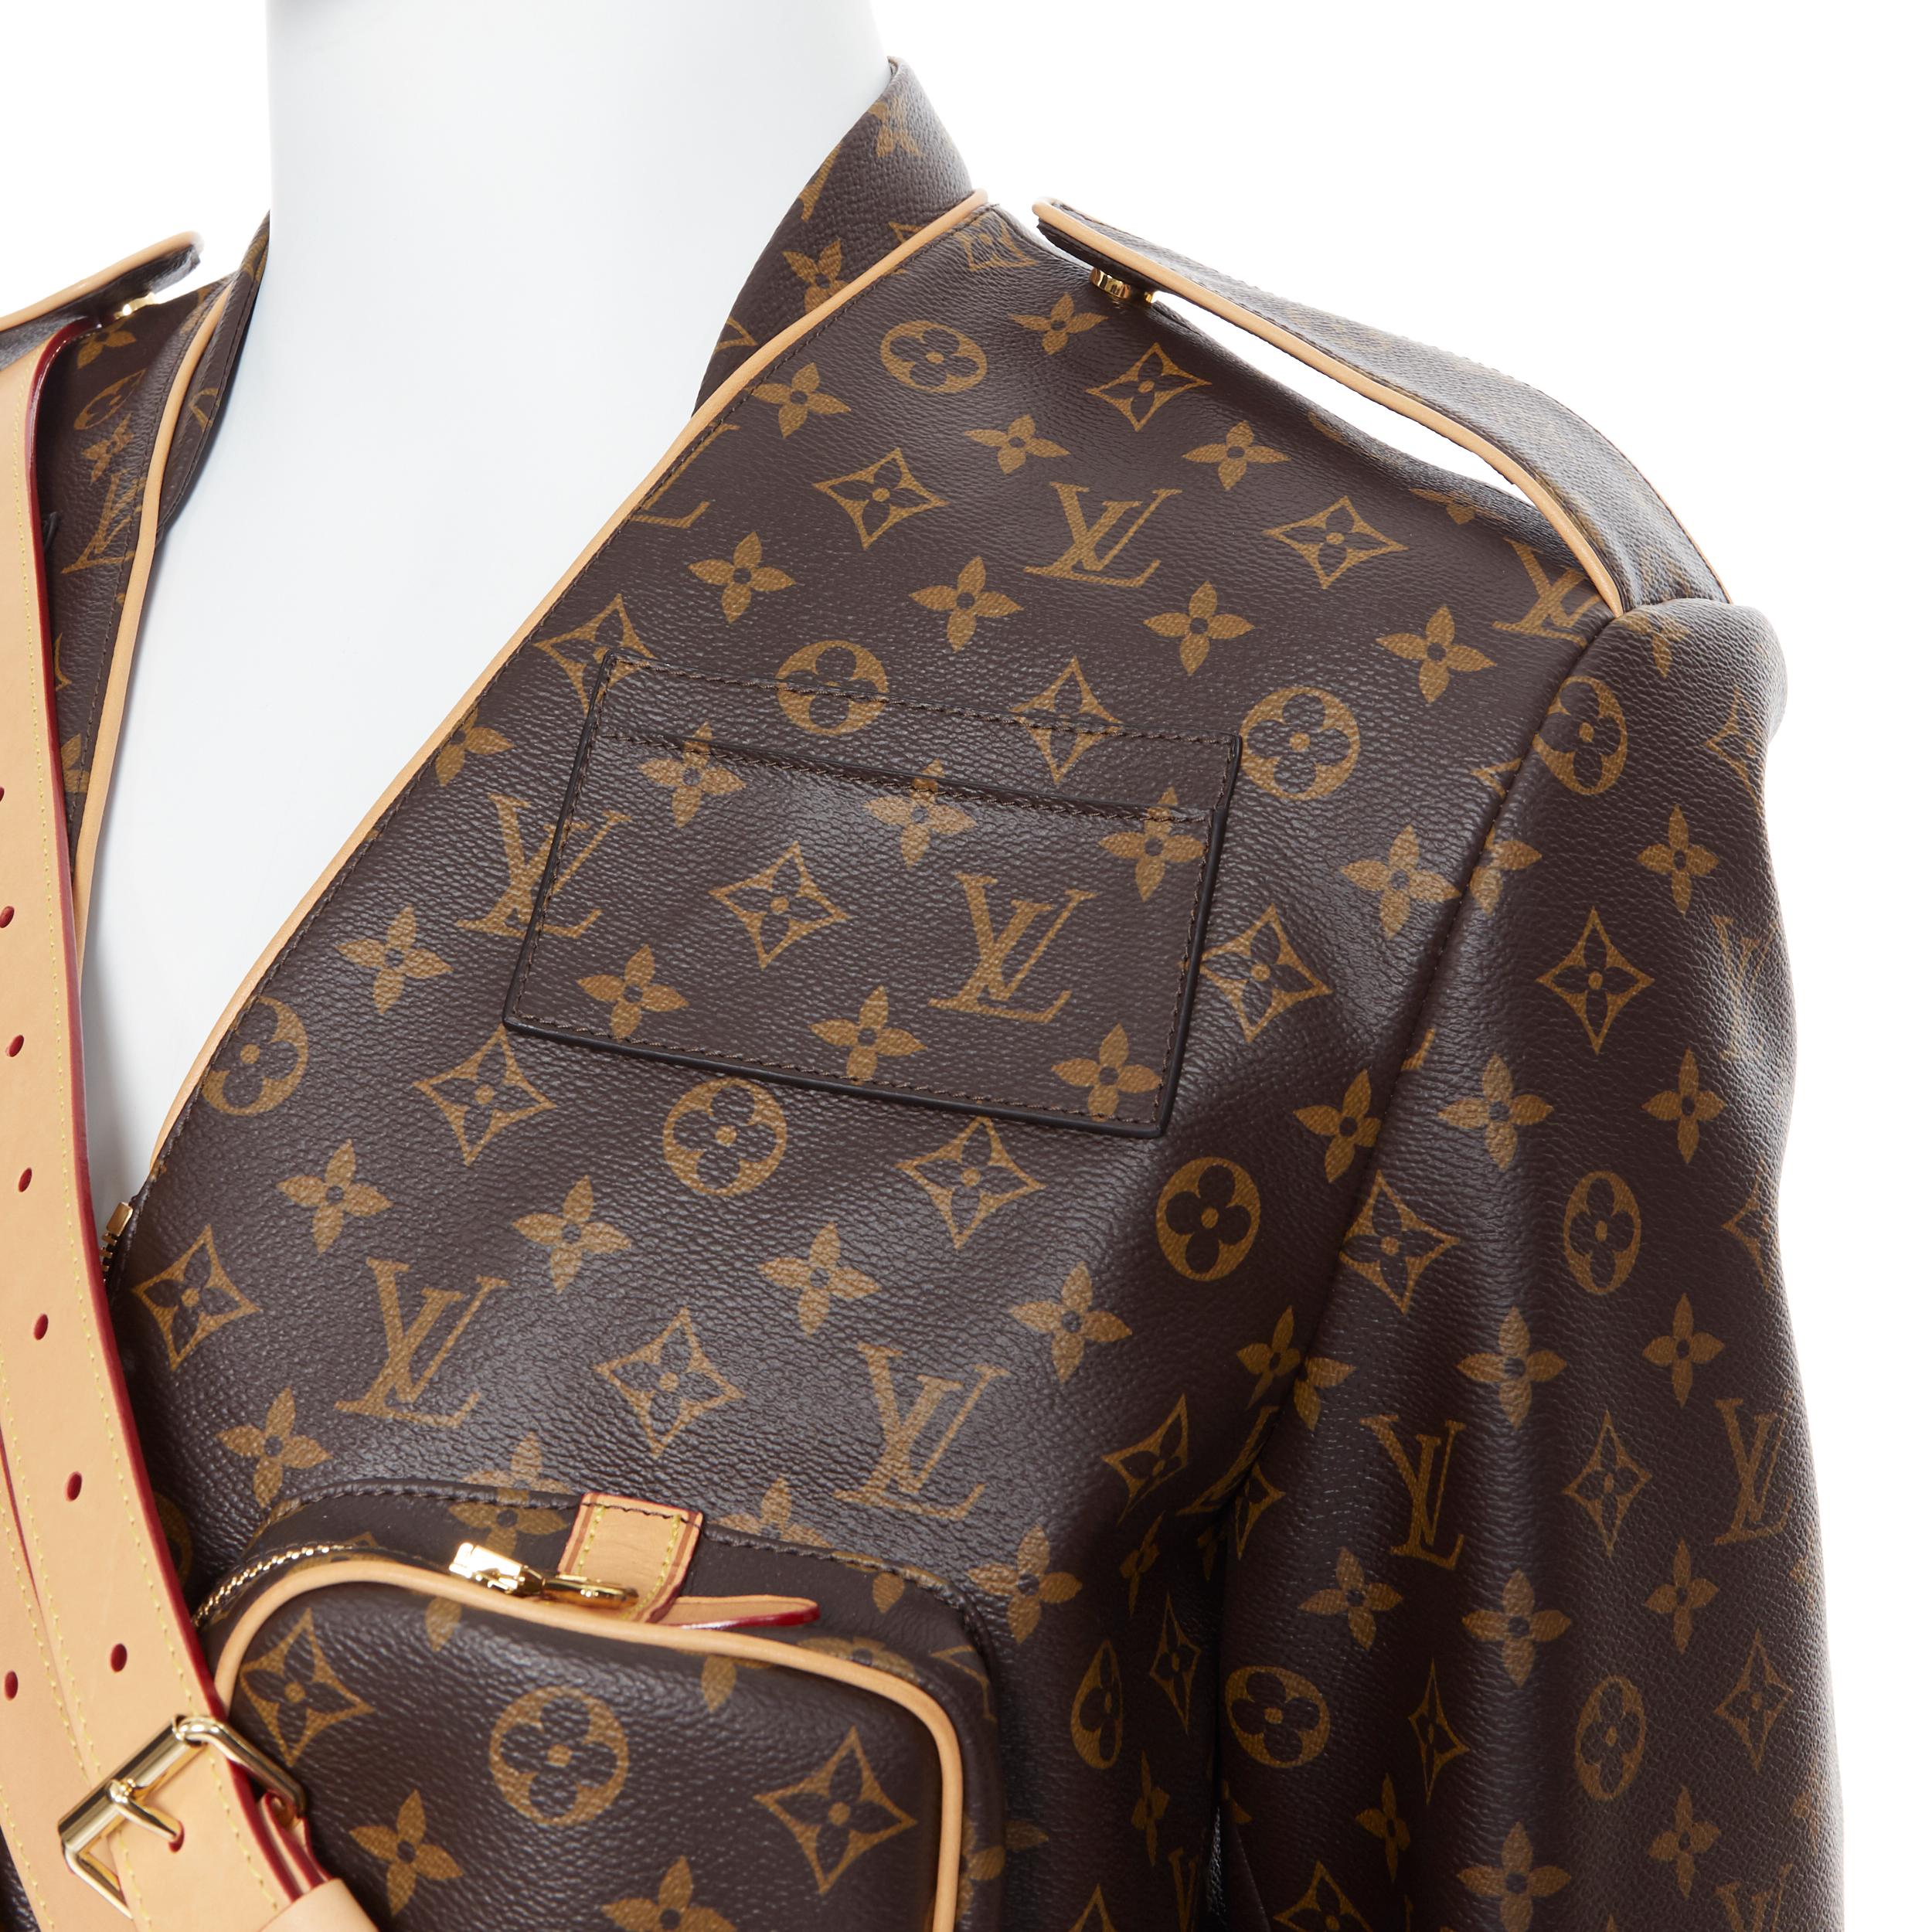 runway LOUIS VUITTON AW19 Sample Admiral brown monogram canvas jacket FR48 M
Brand: Louis Vuitton
Designer: Virgil Abloh
Collection: AW2019
Model Name / Style: Admiral jacket
Material: Other; coated canvas
Color: Brown
Pattern: Other;